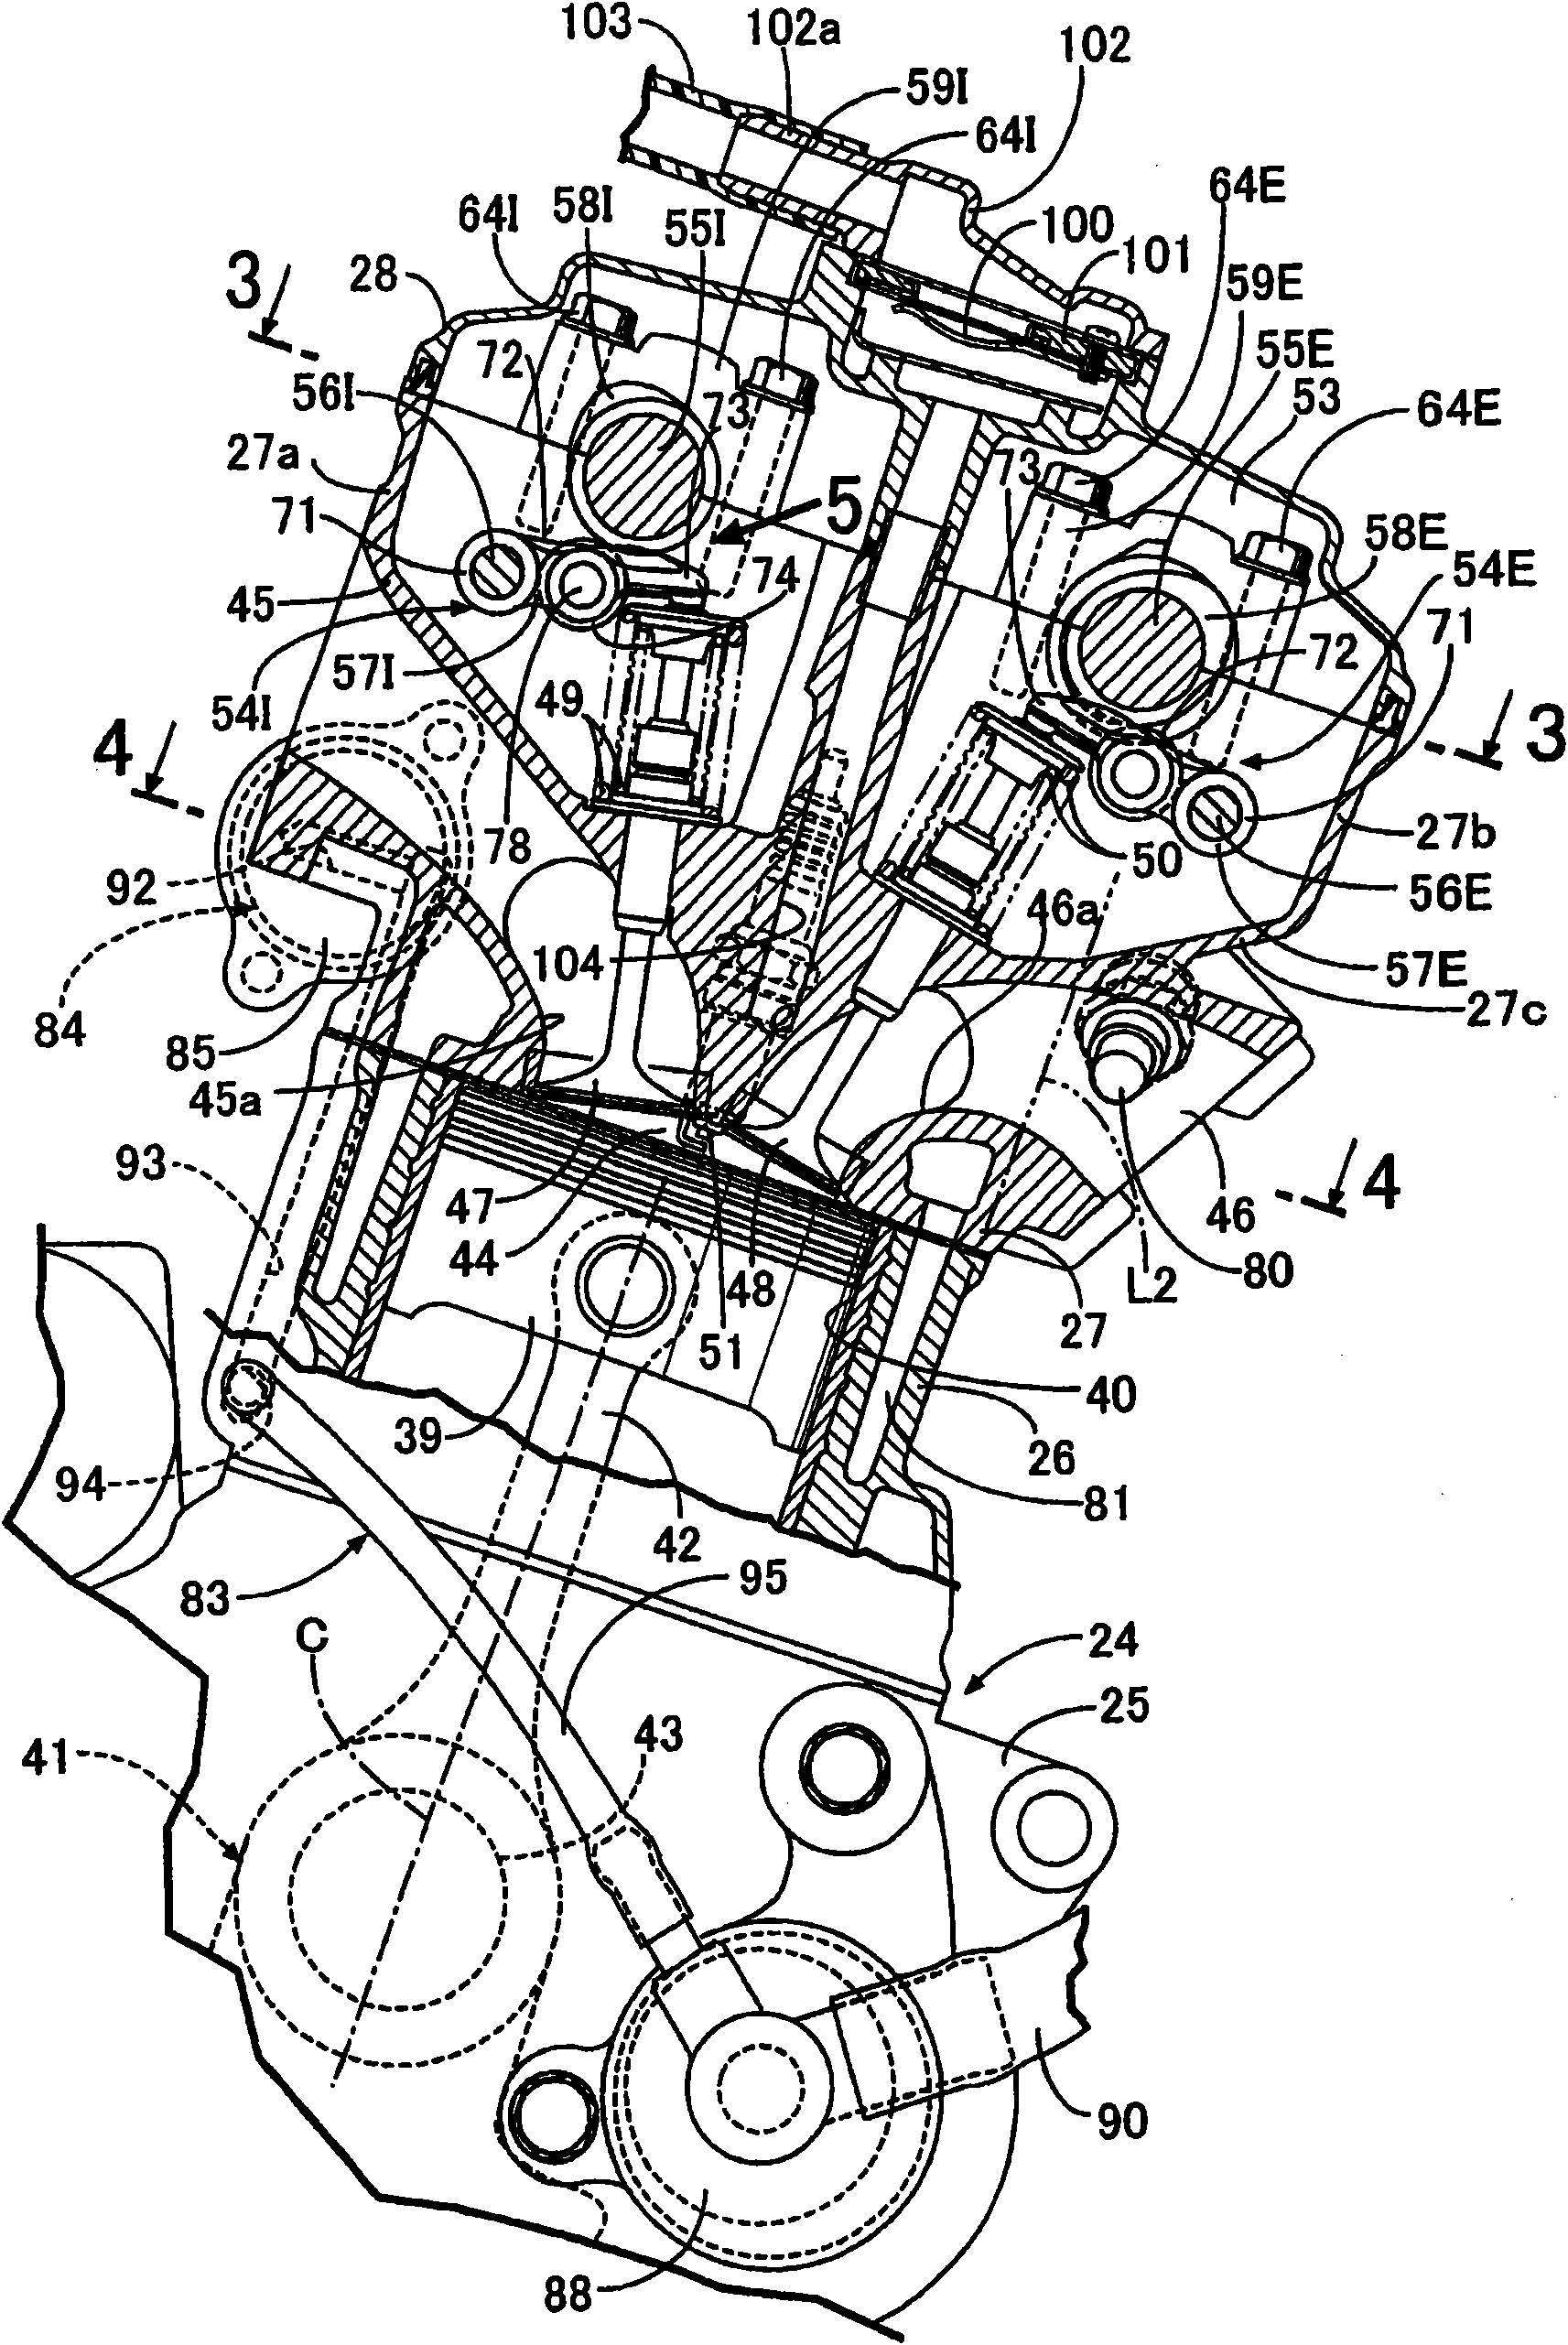 Water-cooled internal combustion engine for vehicle